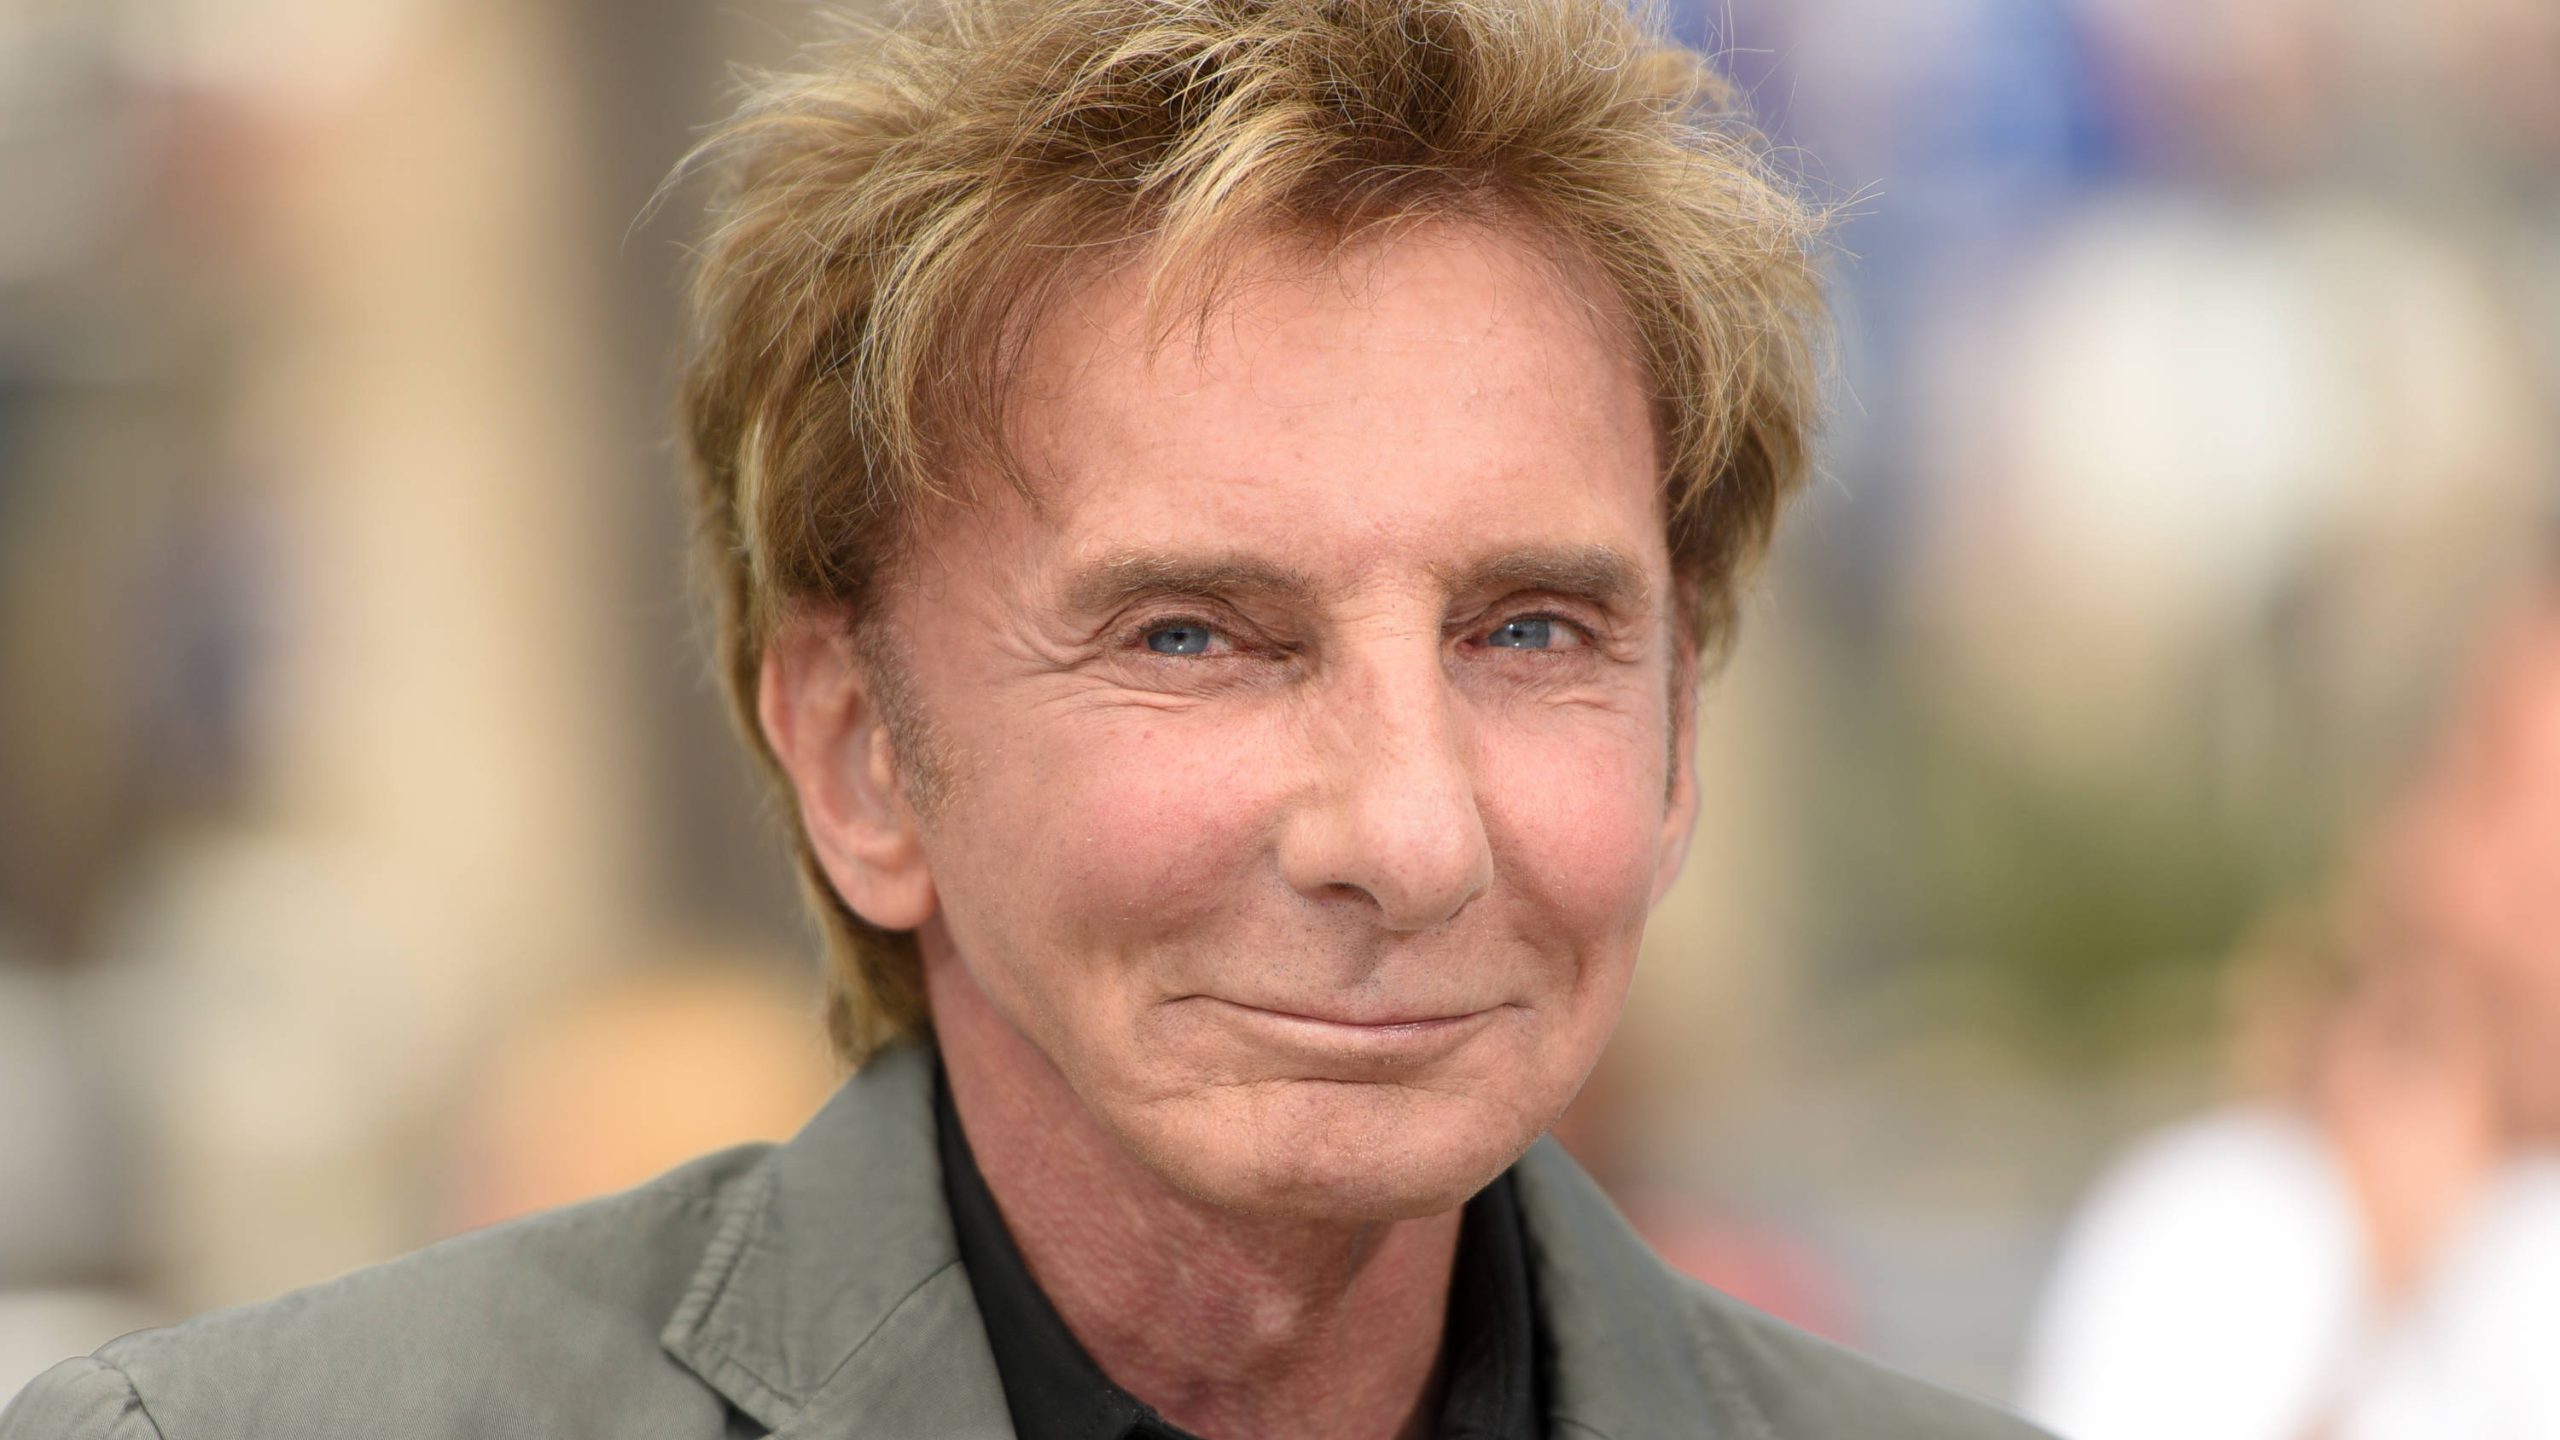 Barry Manilow Opens Up About the Burden of Hiding His Sexuality